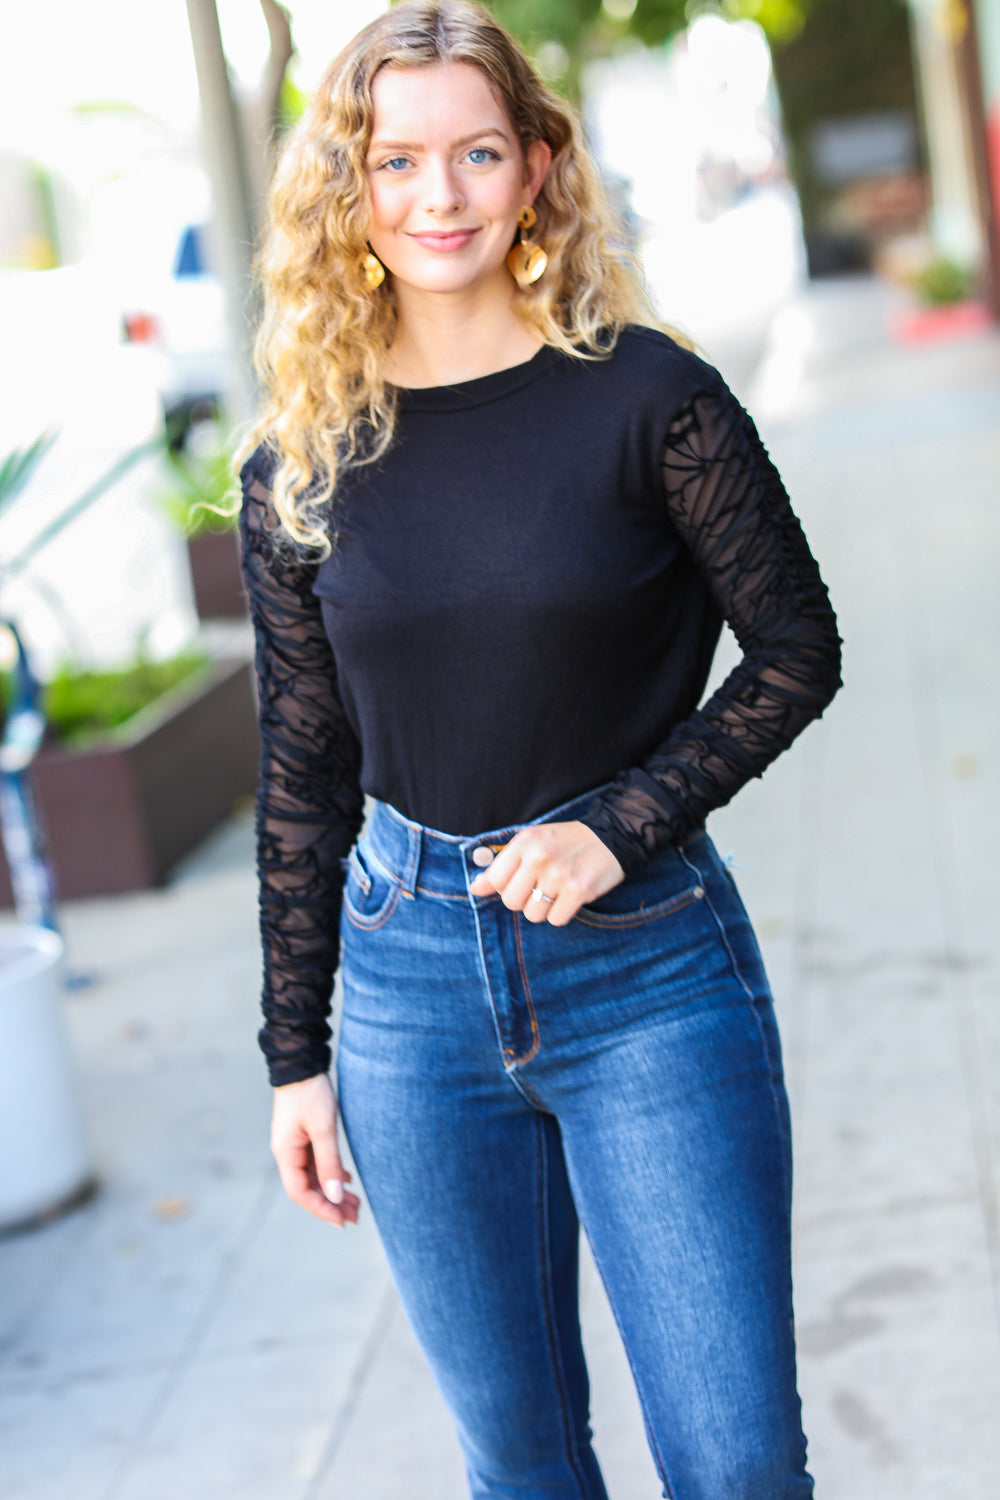 Can't Help But Love Black Shirred Velvet Mesh Blouse-Inspired by Justeen-Women's Clothing Boutique in Chicago, Illinois